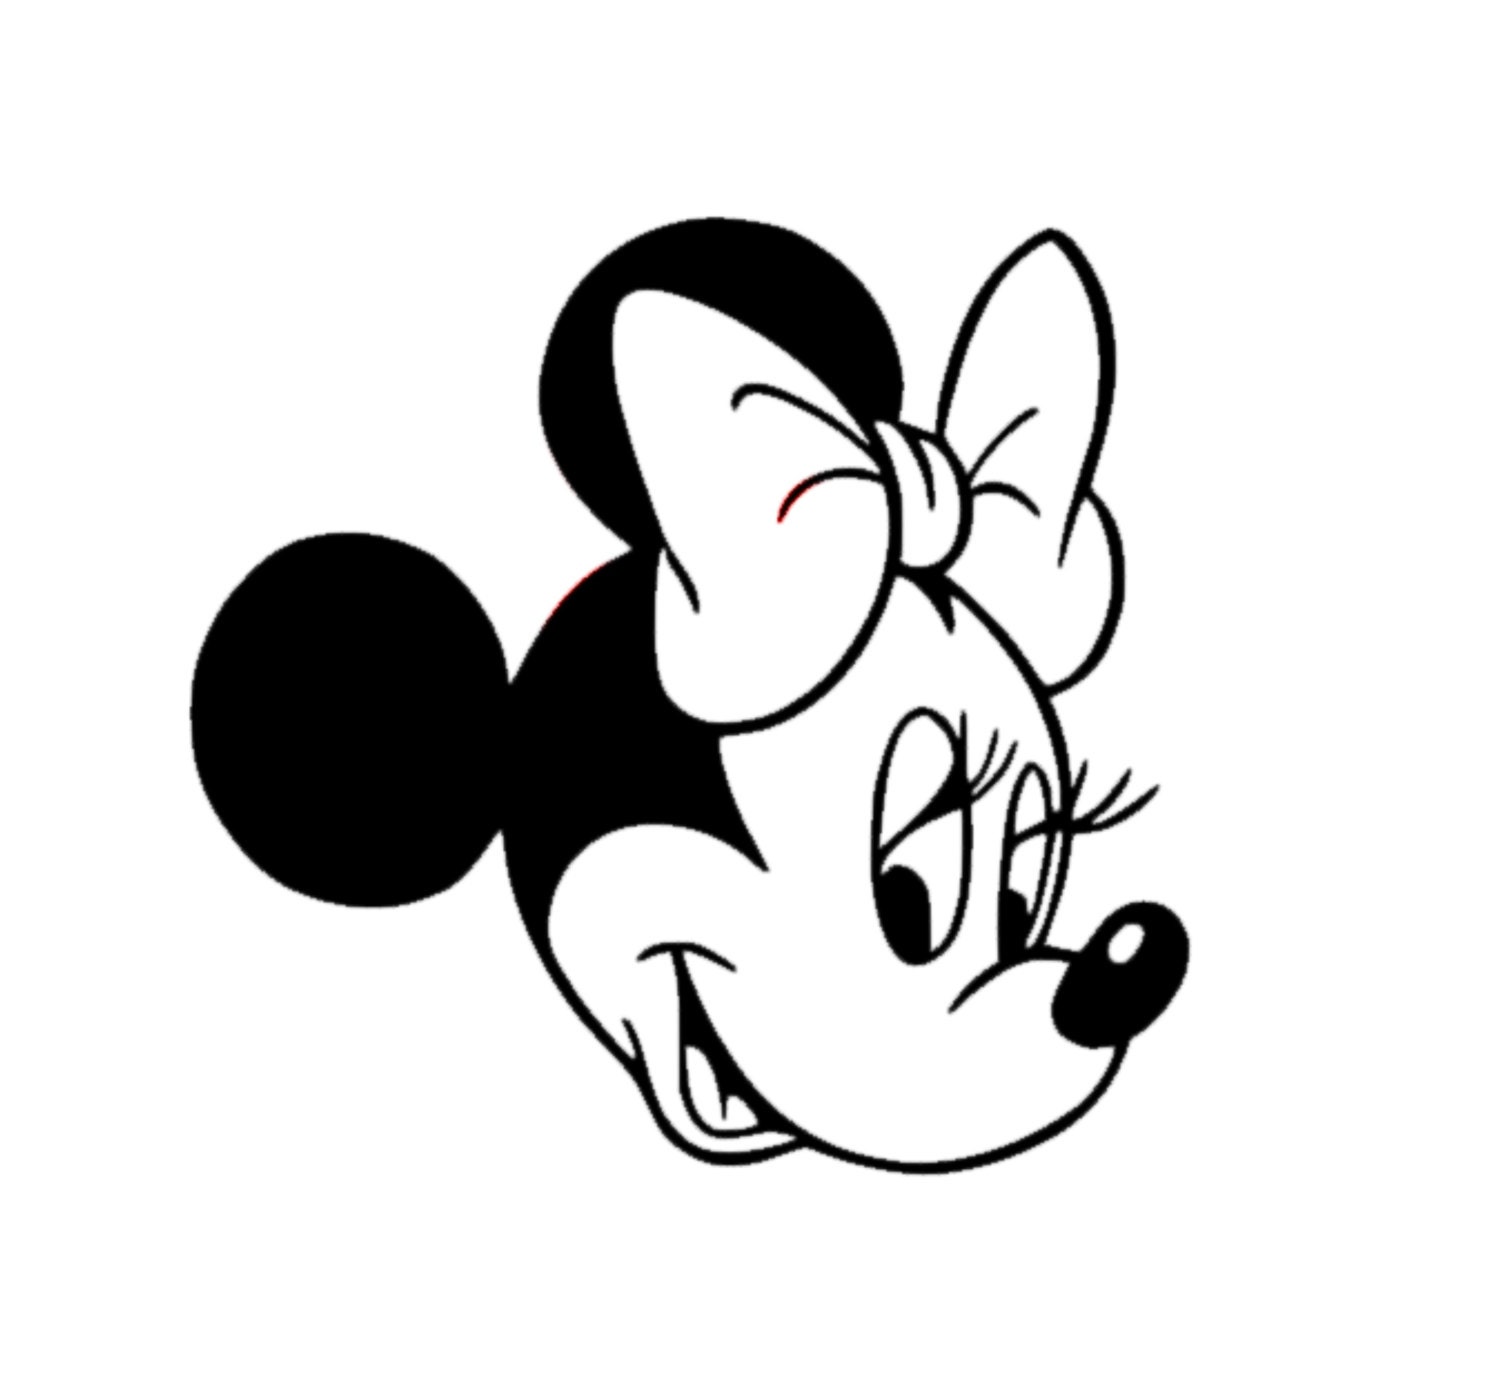 Minnie Mouse Decal Disney Decal Disney Minnie Mouse